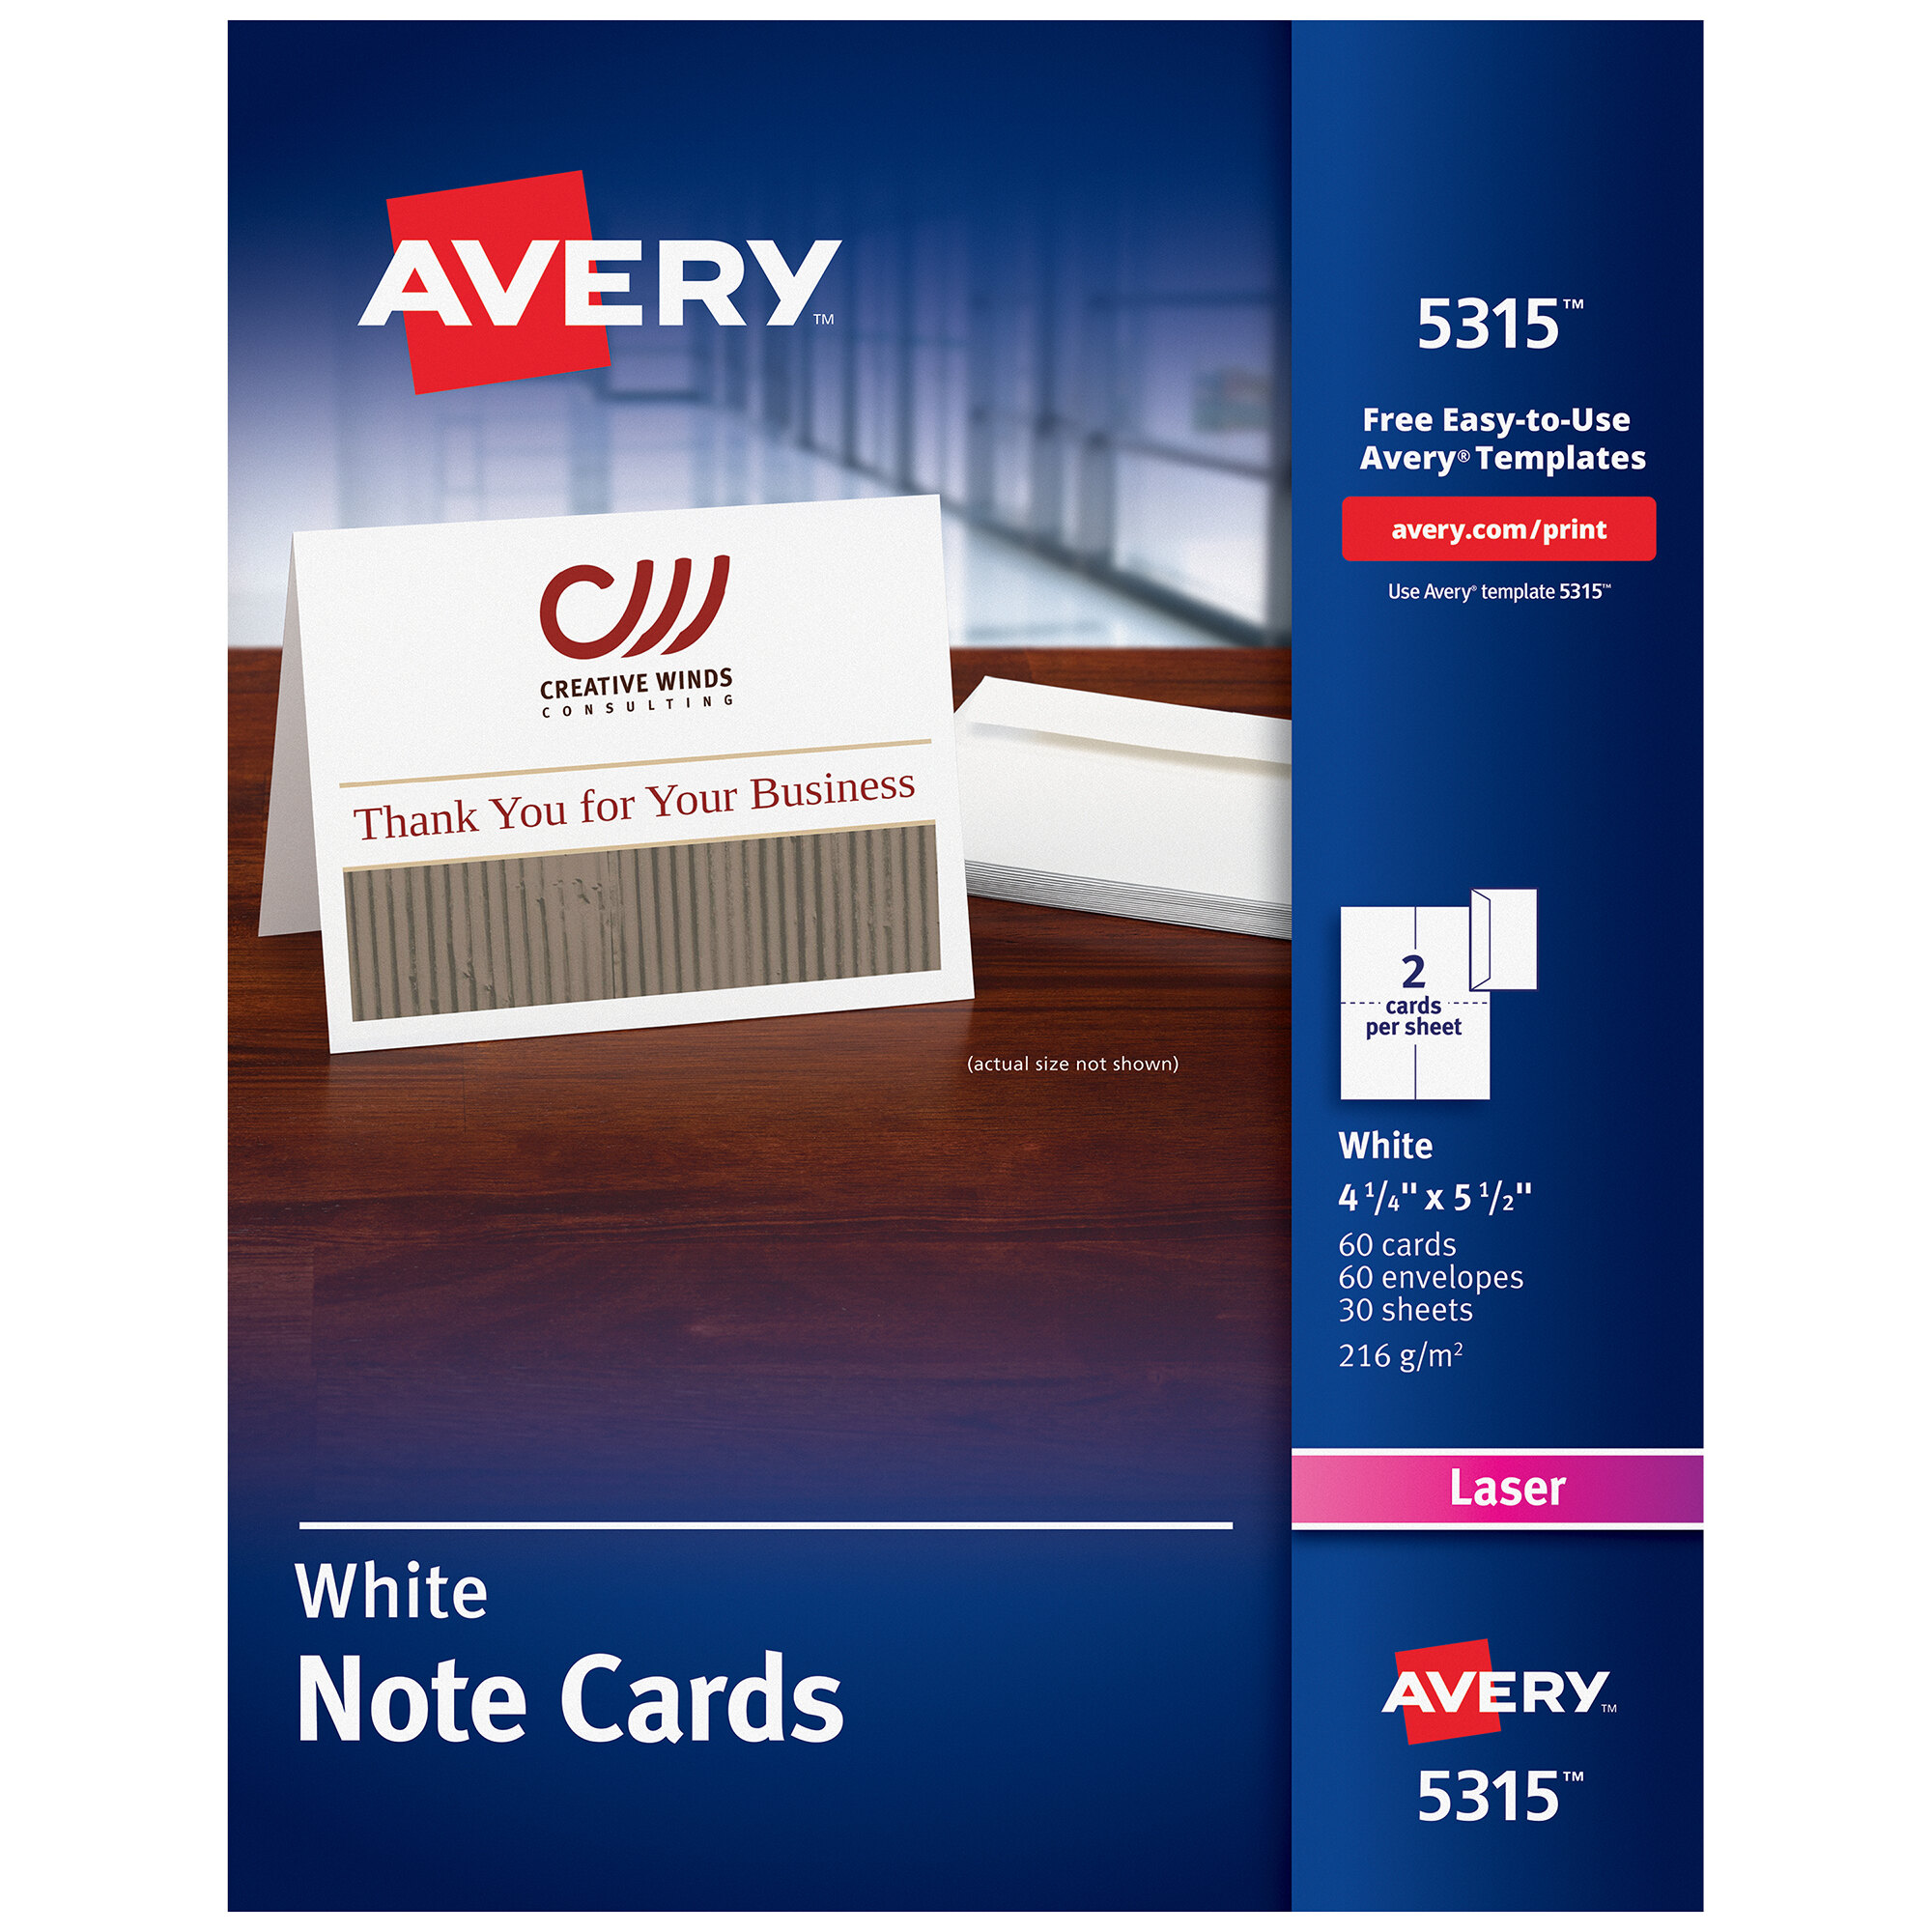 Avery 5315 4 1/4" x 5 1/2" Uncoated White Note Cards with Envelopes